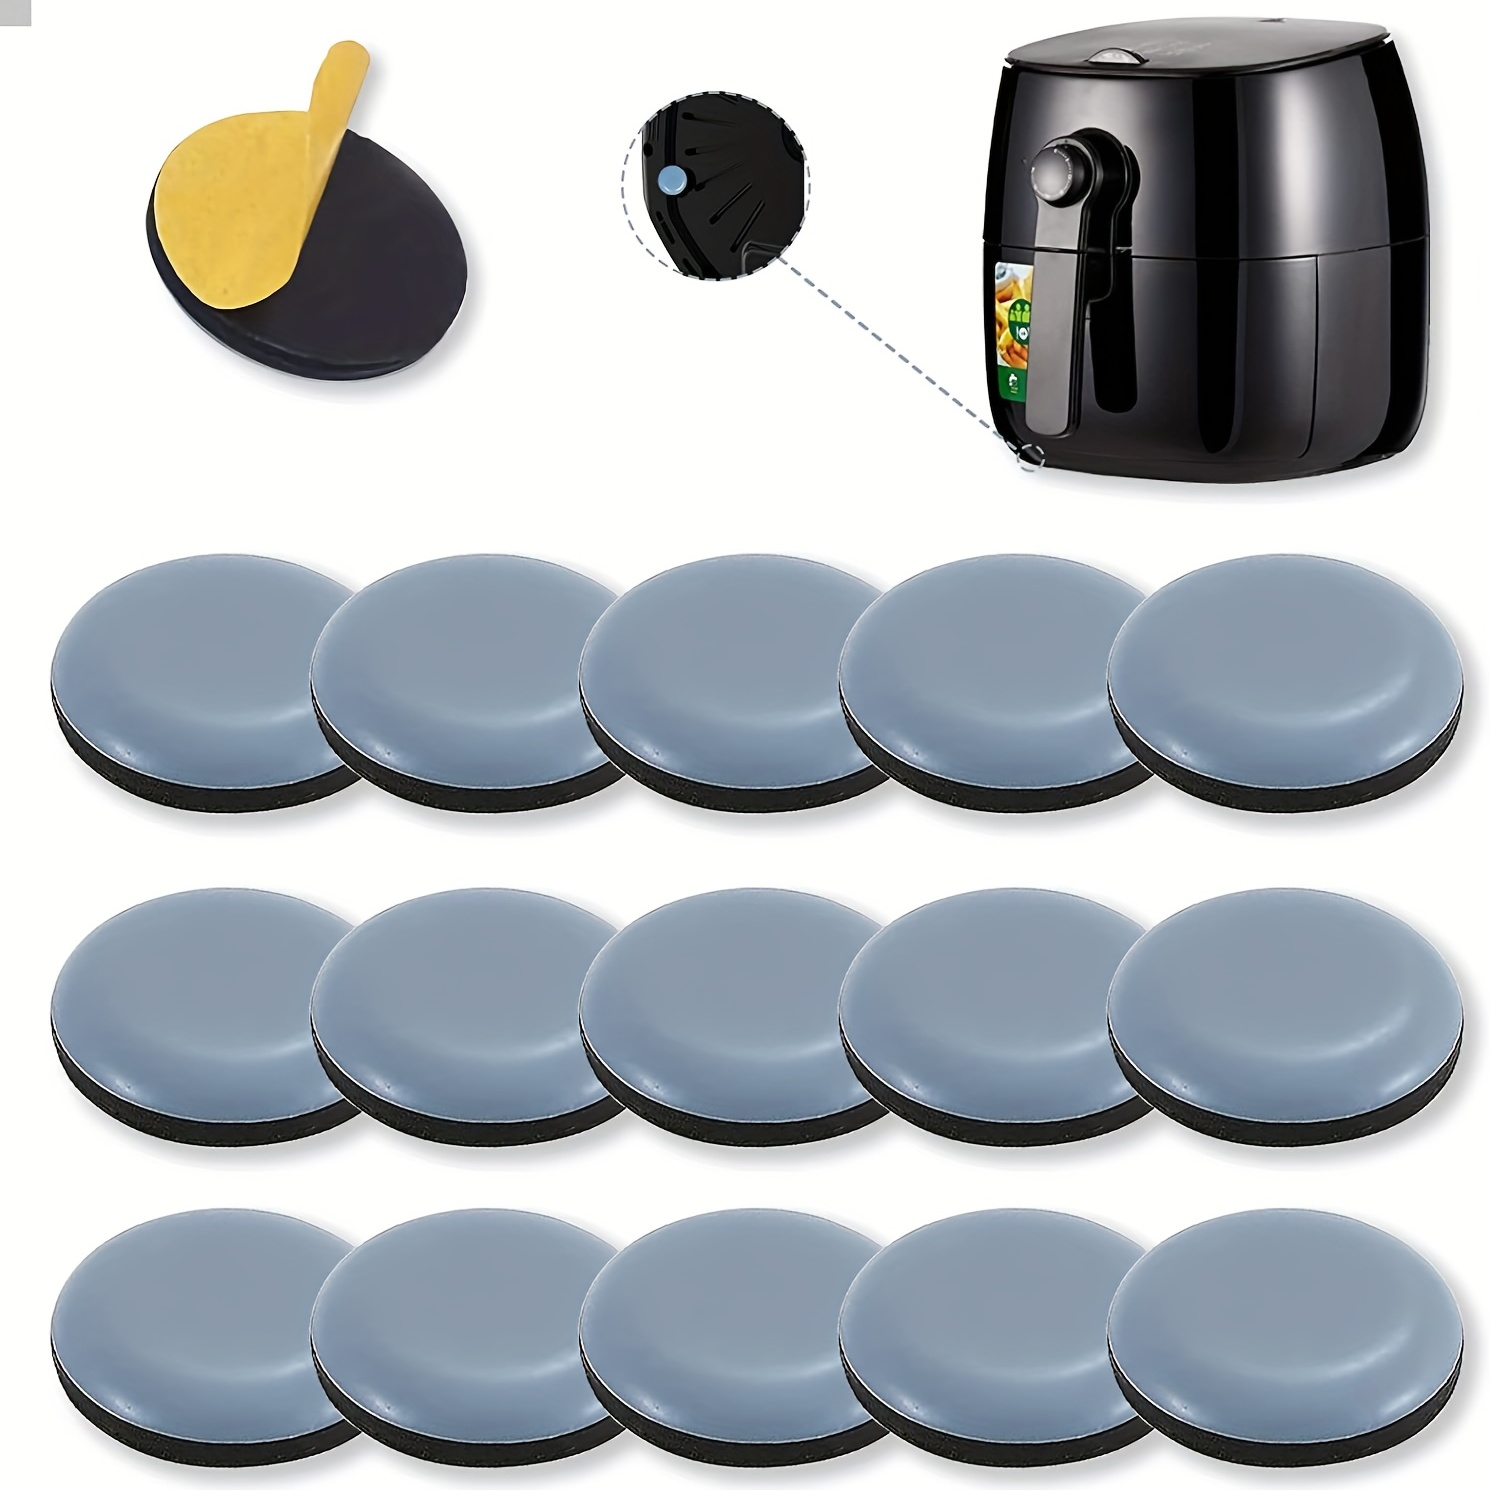 Space-saving Kitchen Appliance Sliders - Self-adhesive For Coffee